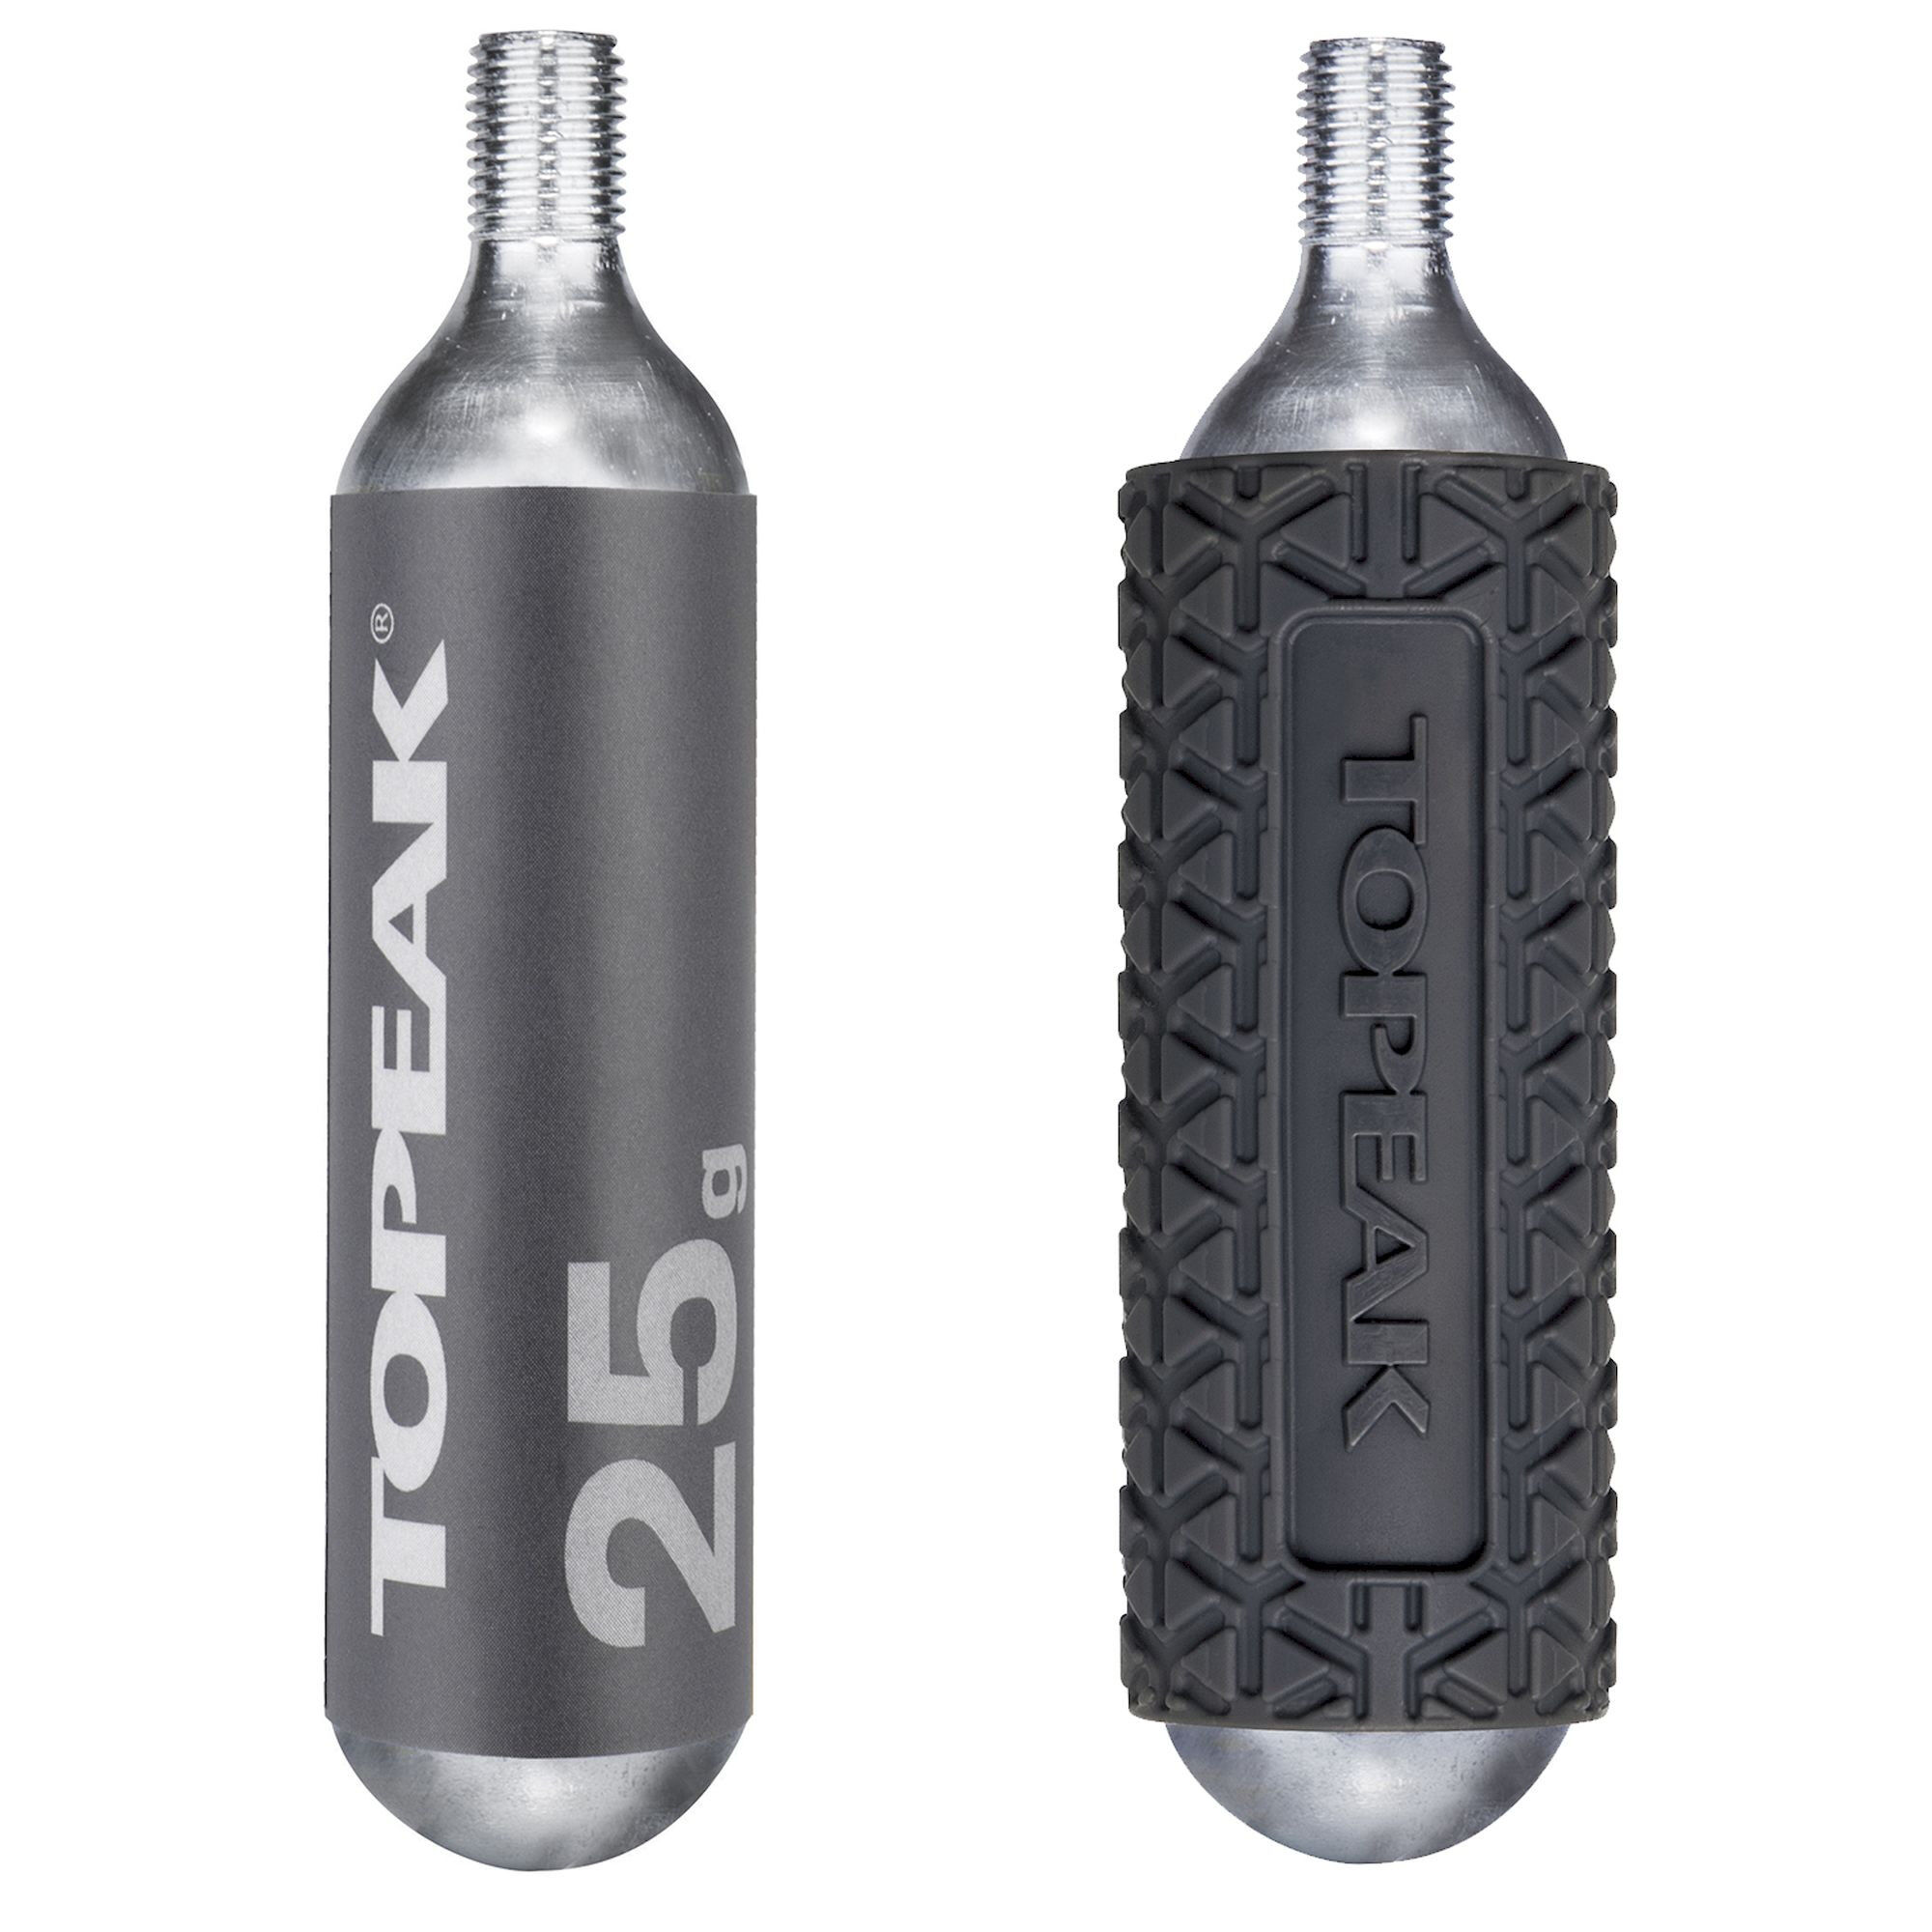 Topeak CO2 Cartridge 25g Threated (2 pieces w/ 1 cover) - Inflátor CO2 | Hardloop